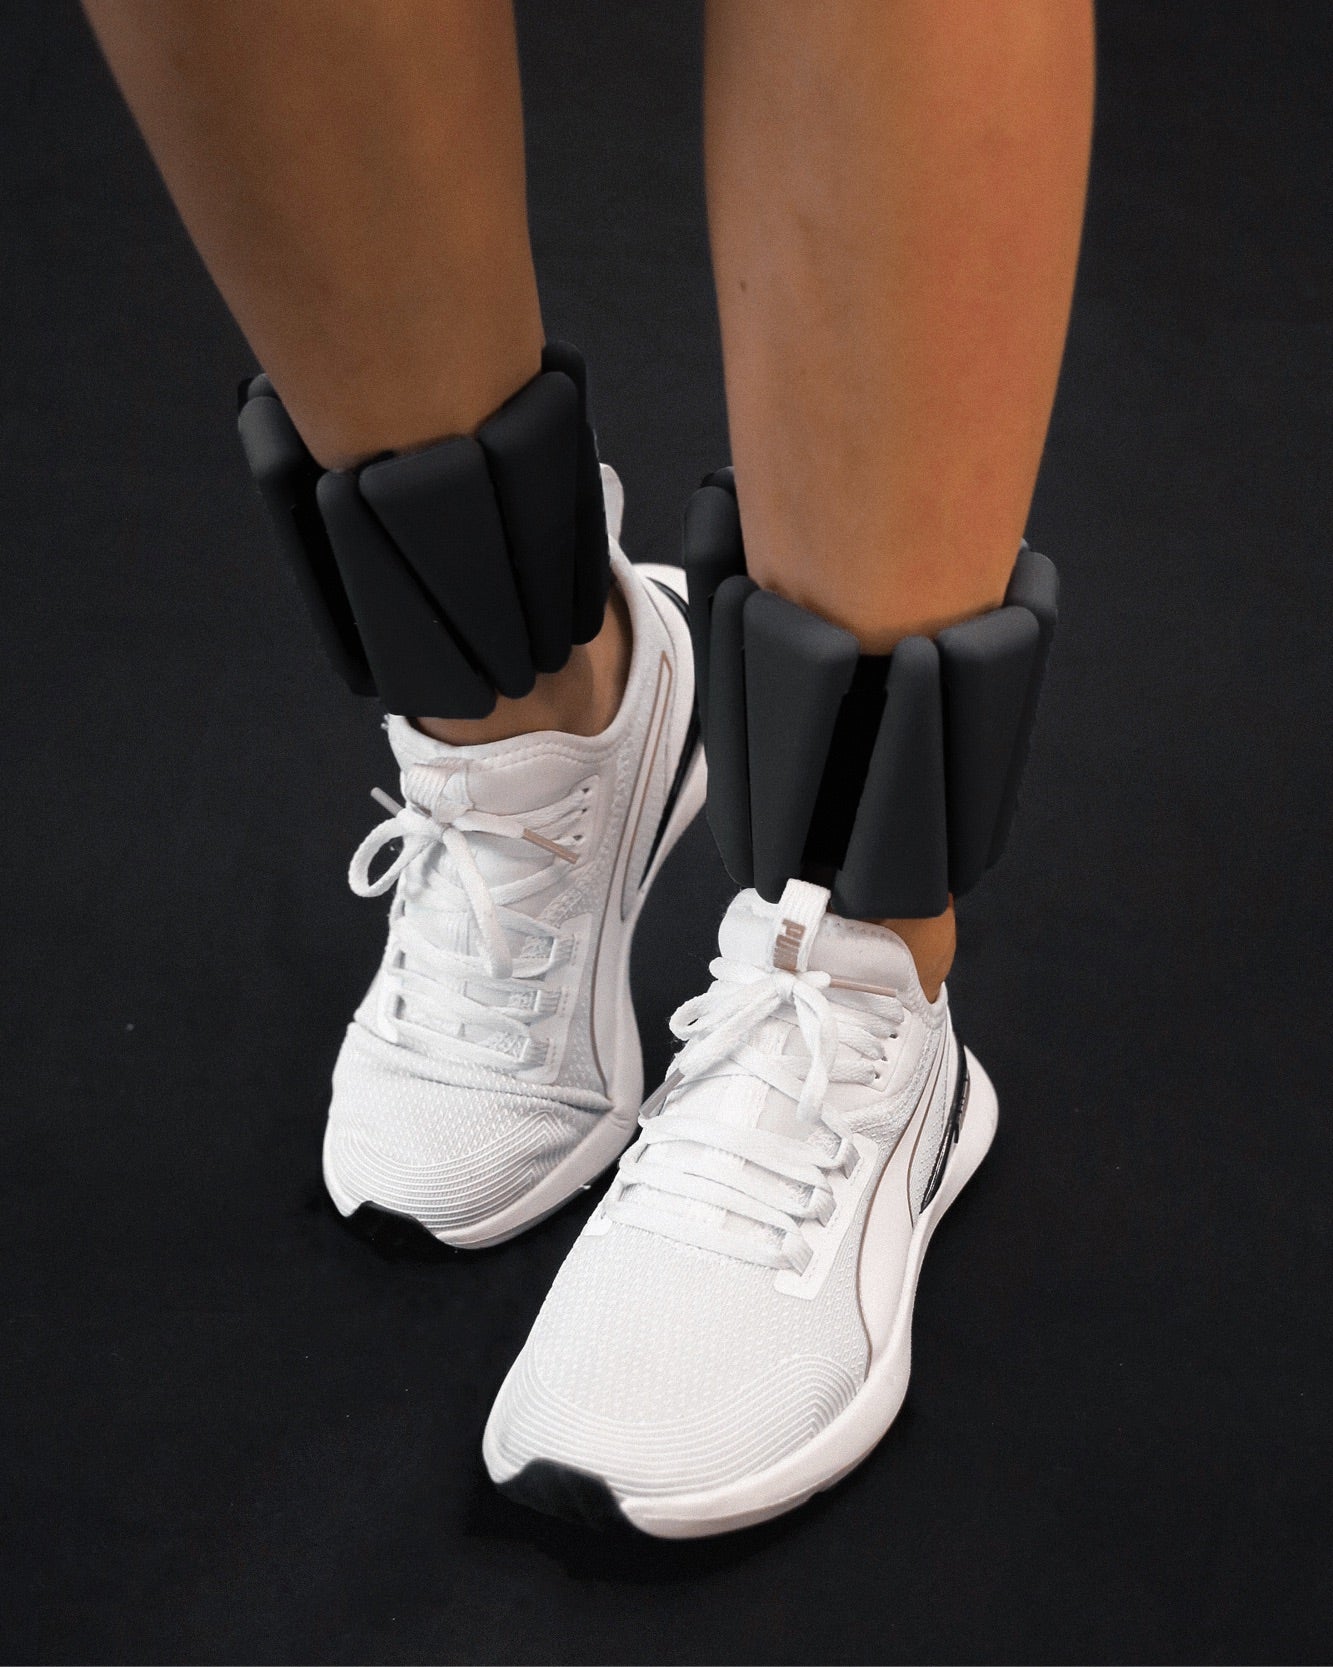 Adjustable Australian Women 2kg Ankle Weights & Wrist Weights for your workouts & exercises! These have great benefits for walking, building muscle, pilates & more.